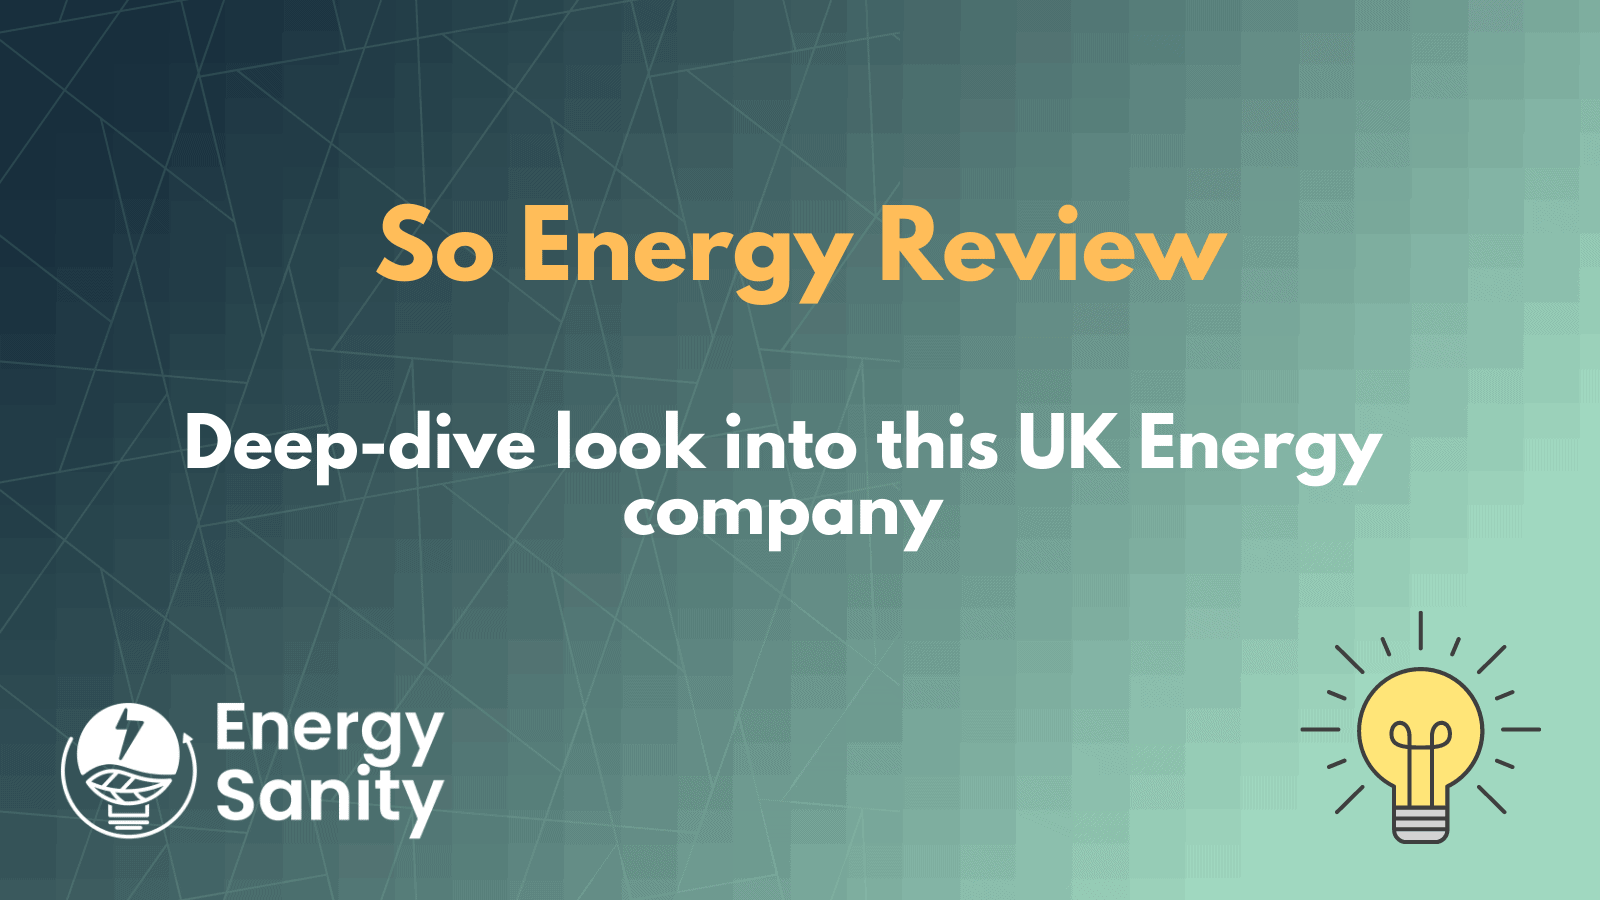 So Energy Review